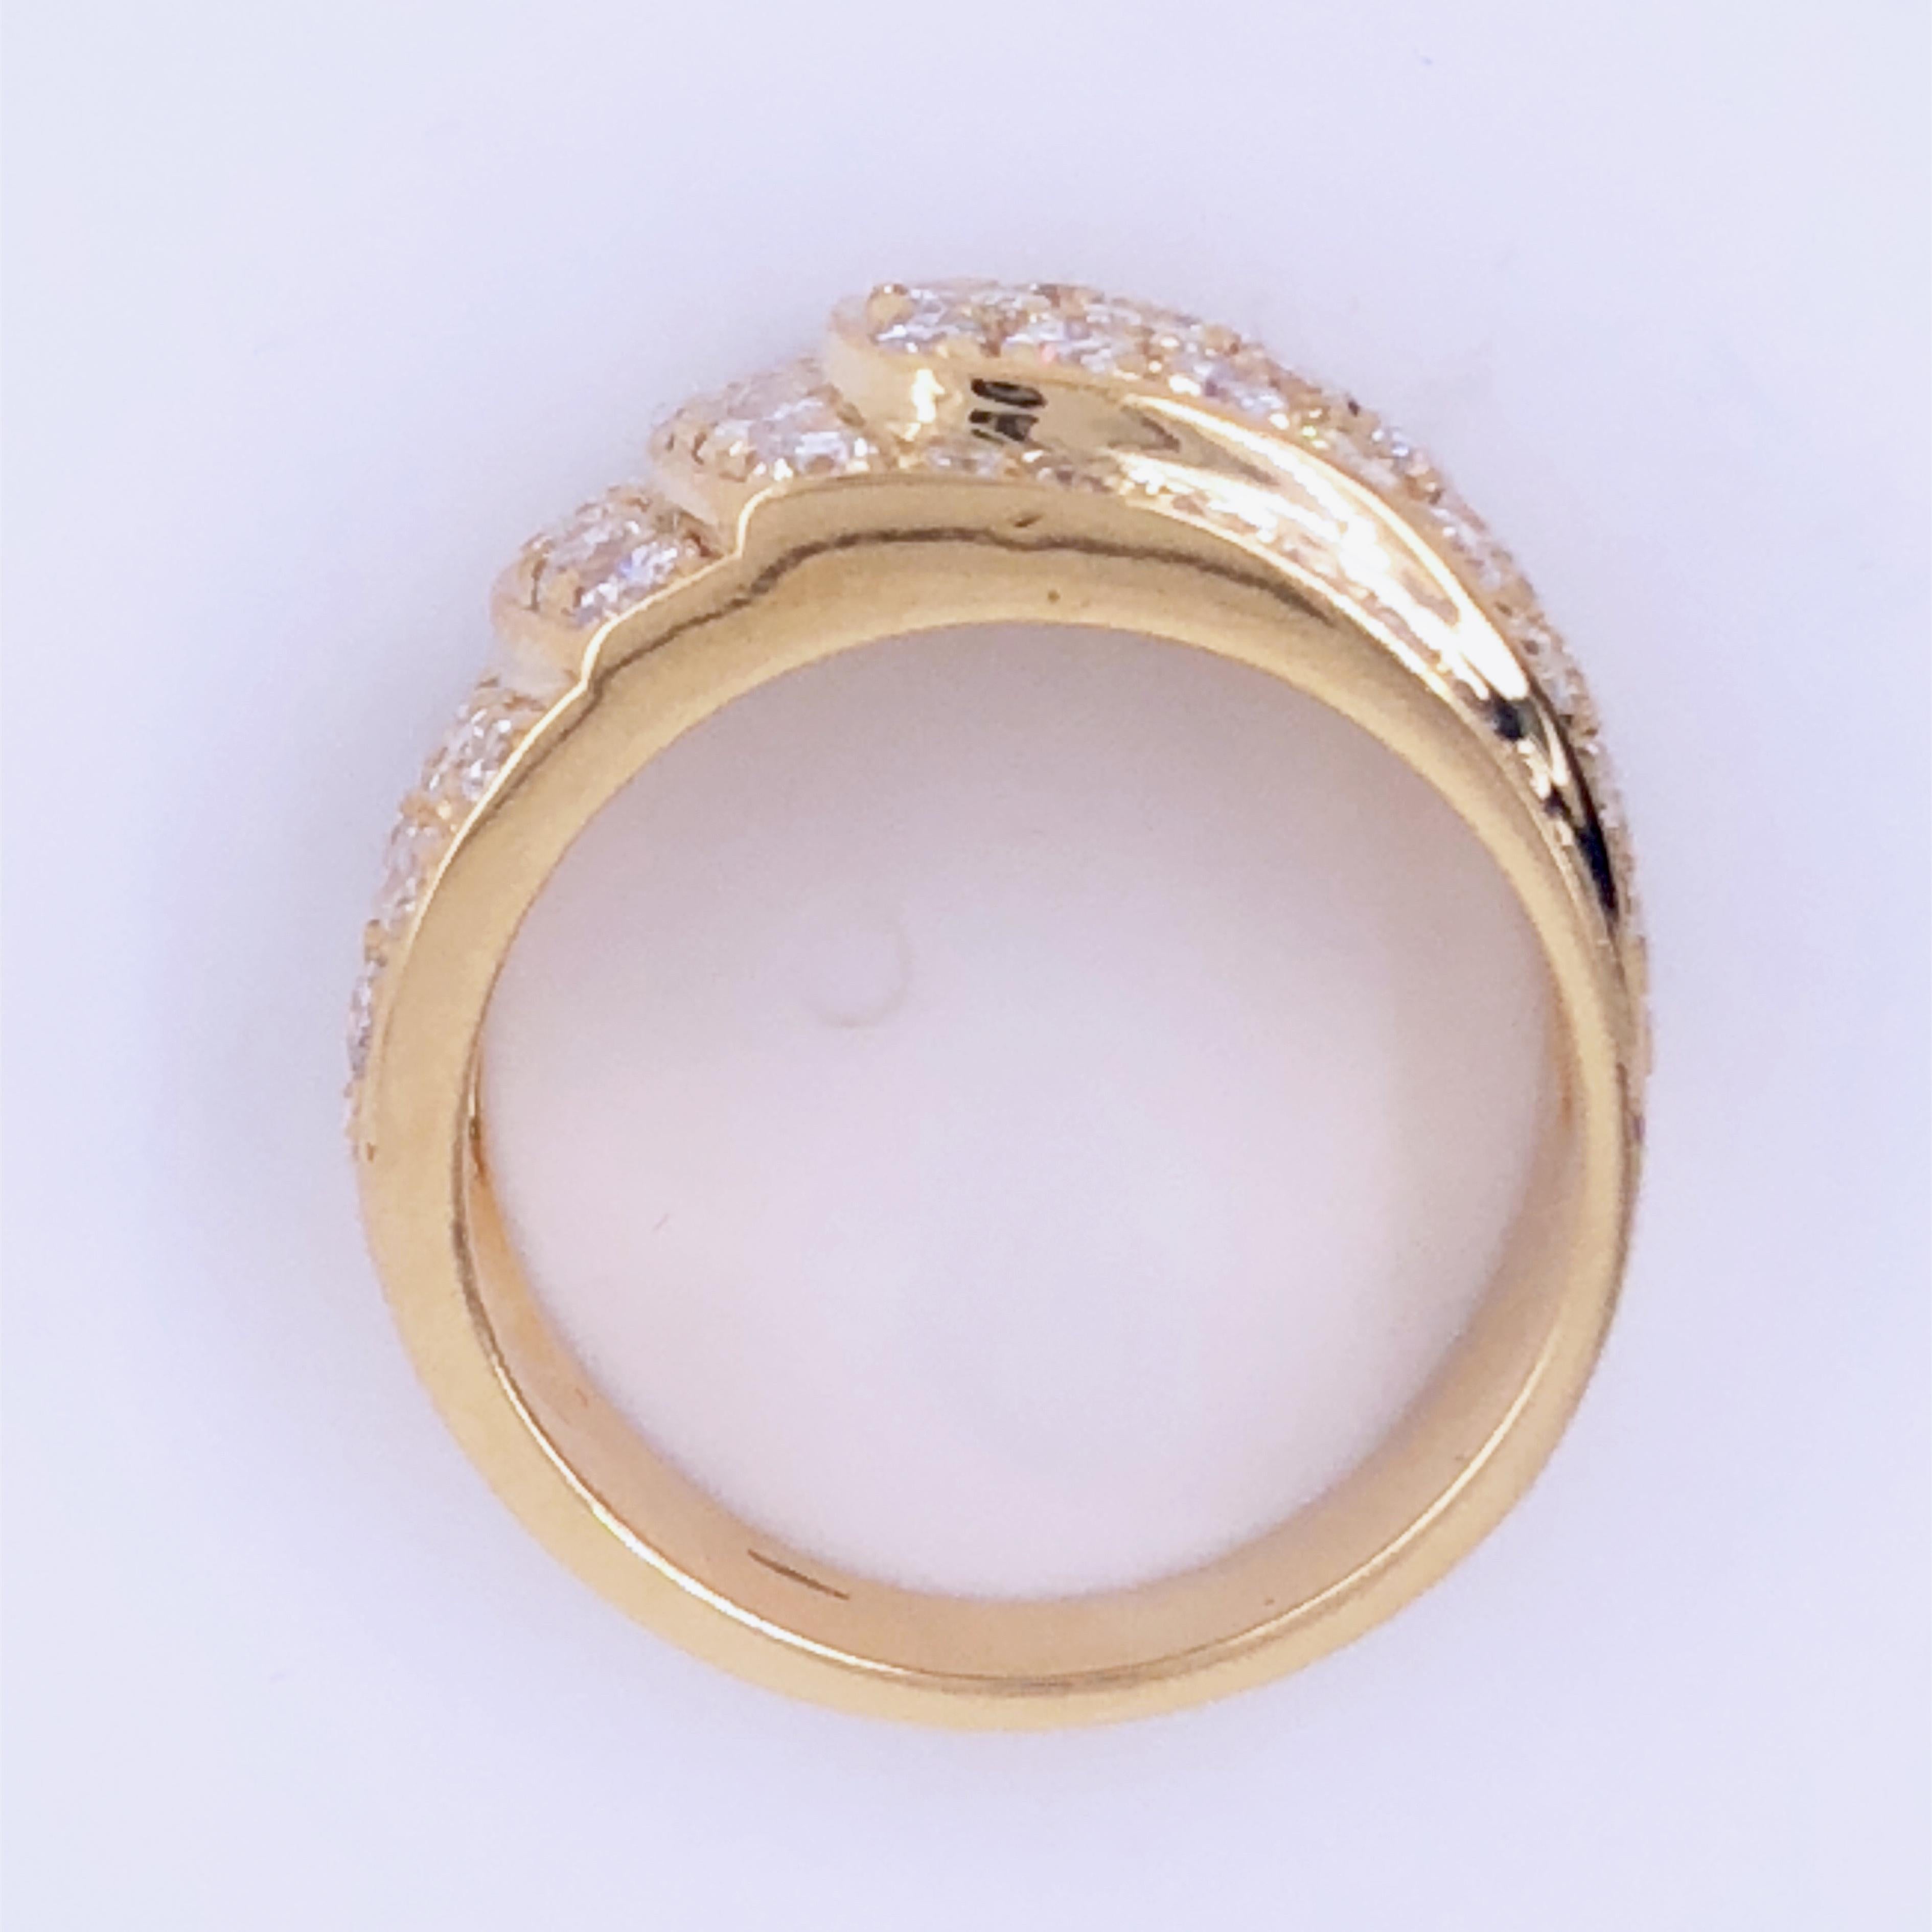 Stunning 2.41 Carat, 71 Top Quality White Diamond French 1970's Yellow Gold Setting Band Ring: this piece while unsigned has a strong design that stands up to some of the biggest jewelry names, Van Cleef & Arpel immediately comes to mind.
Beautiful